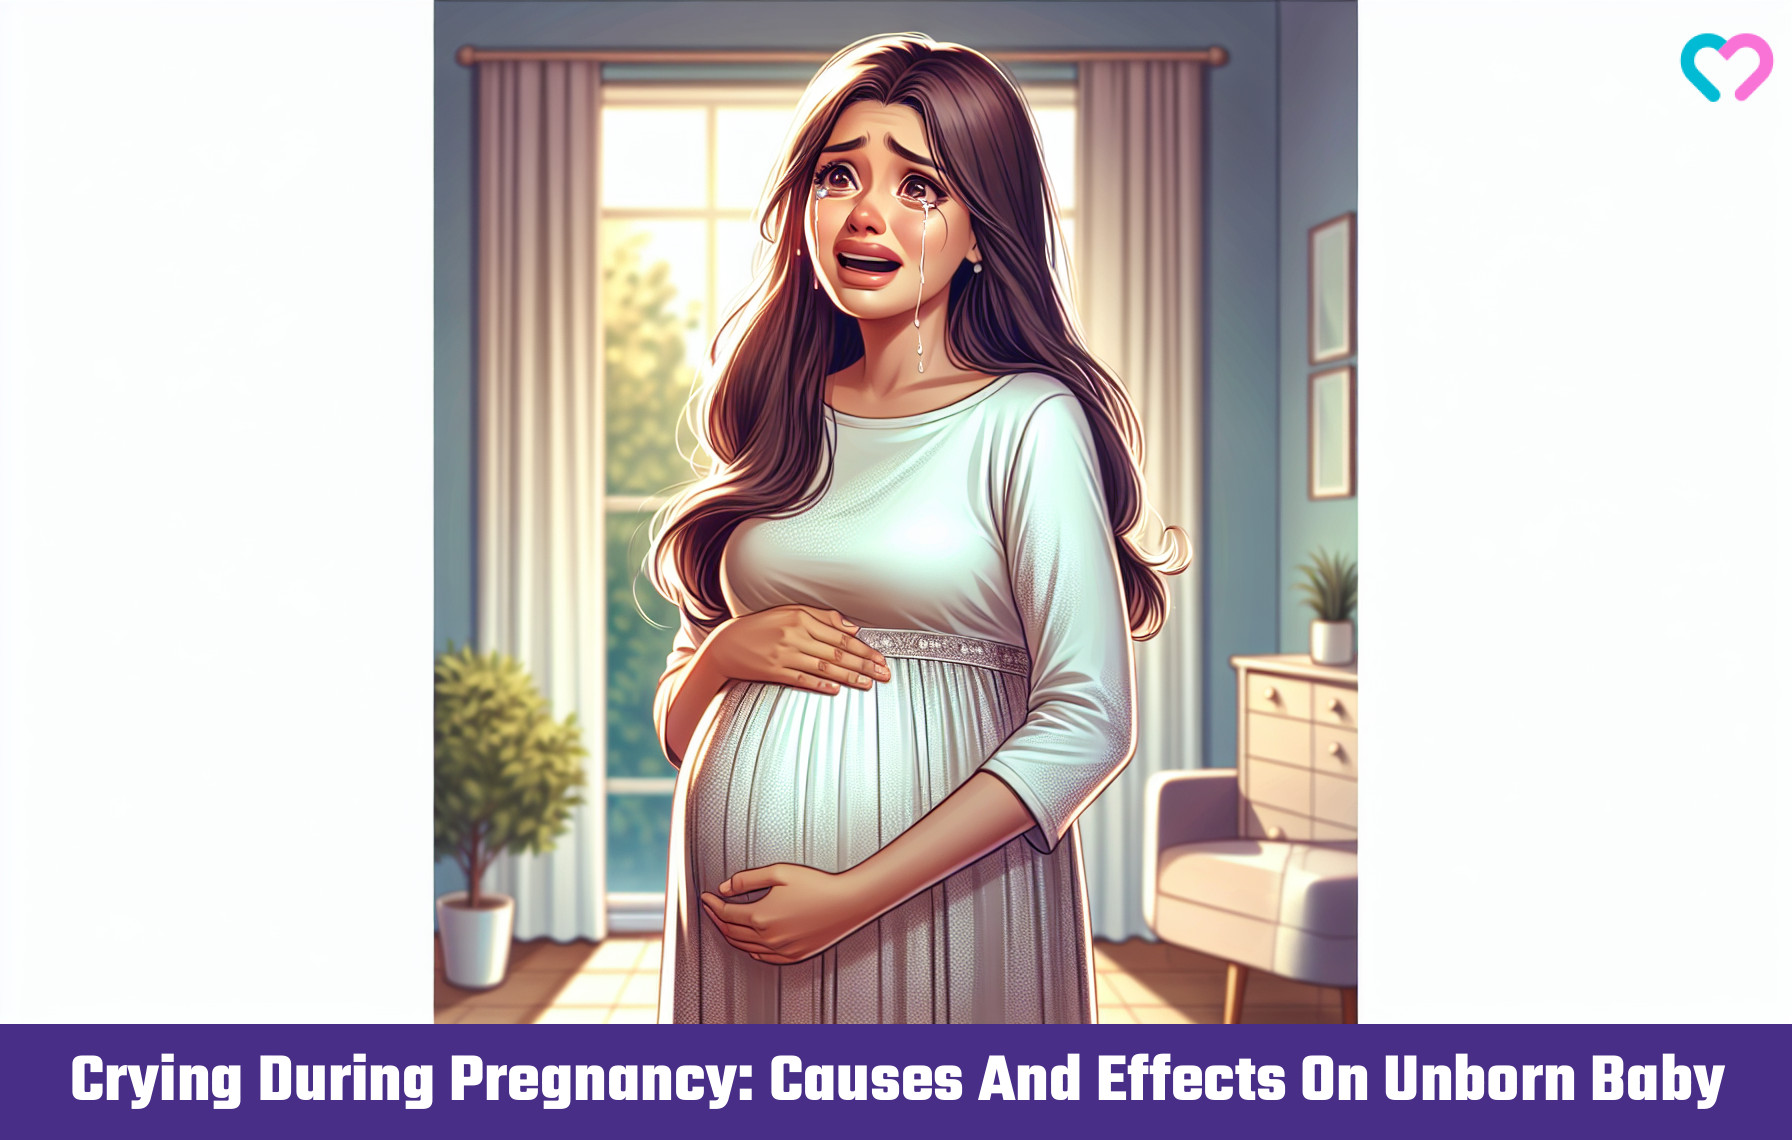 Crying During Pregnancy: Causes And Effects On Unborn Baby_illustration